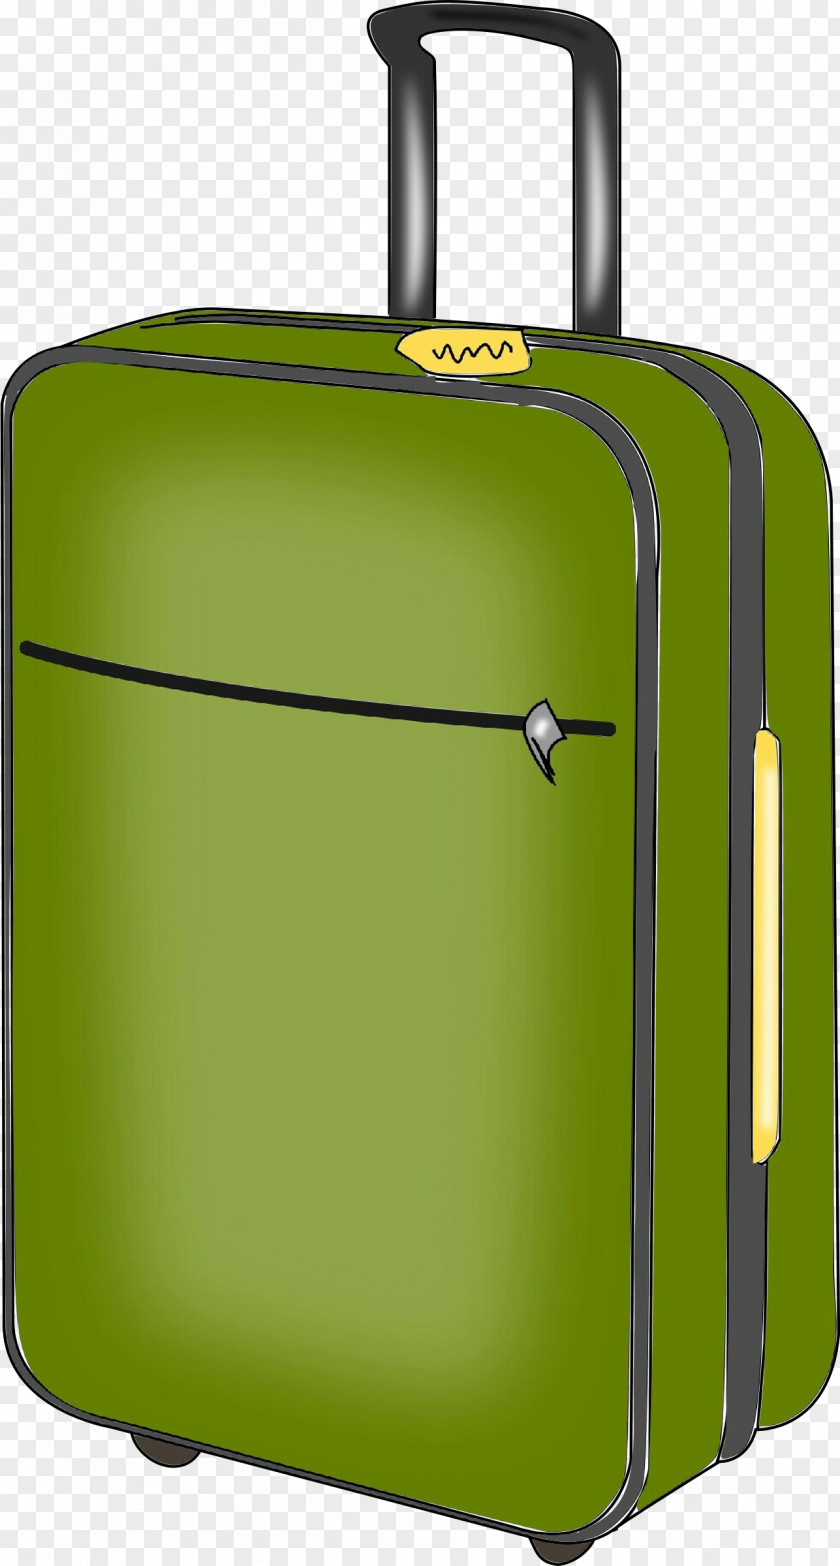 Luggage And Bags Baggage Suitcase Green Hand PNG